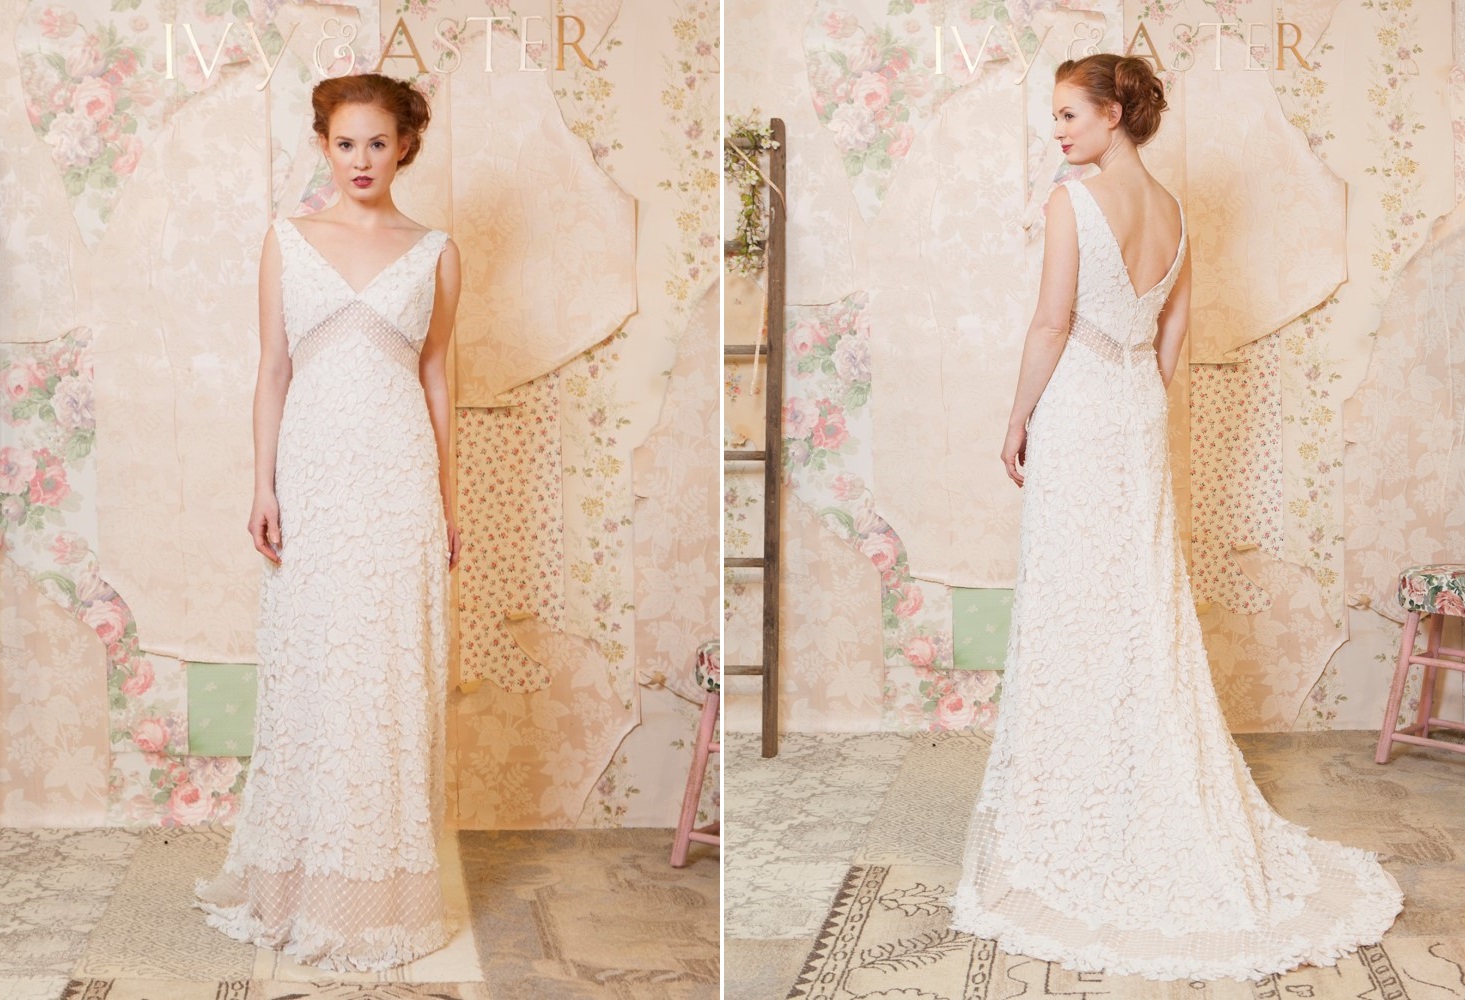 'Through the Flowers' Ivy & Aster's Charming Spring 2016 Bridal Collection